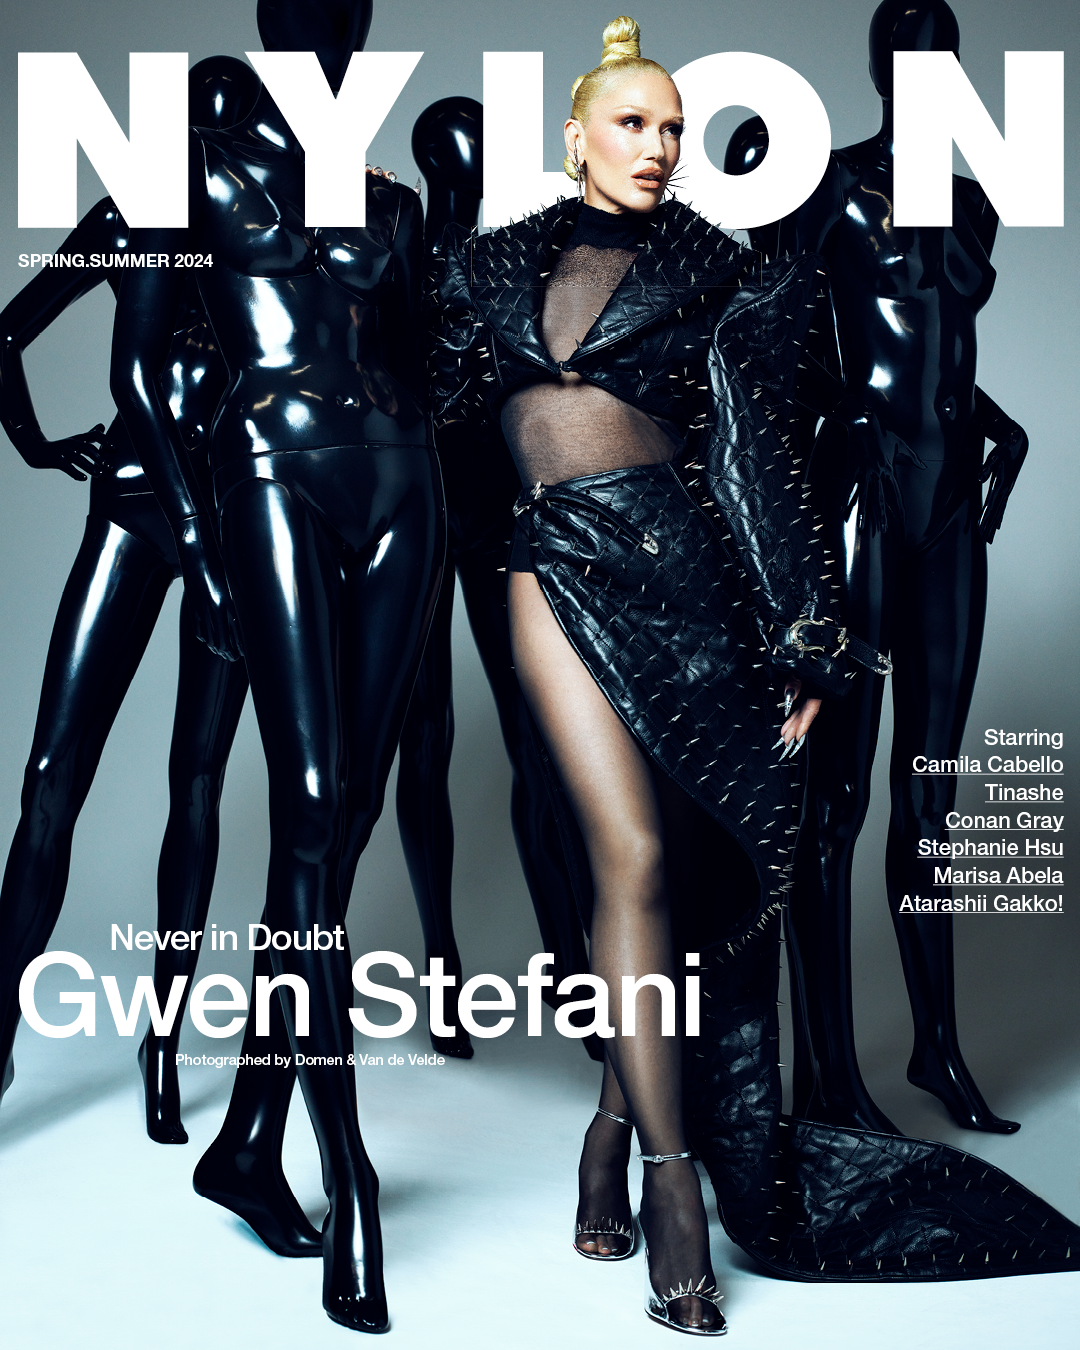 Gwen spoke for the 25th anniversary issue of Nylon mag